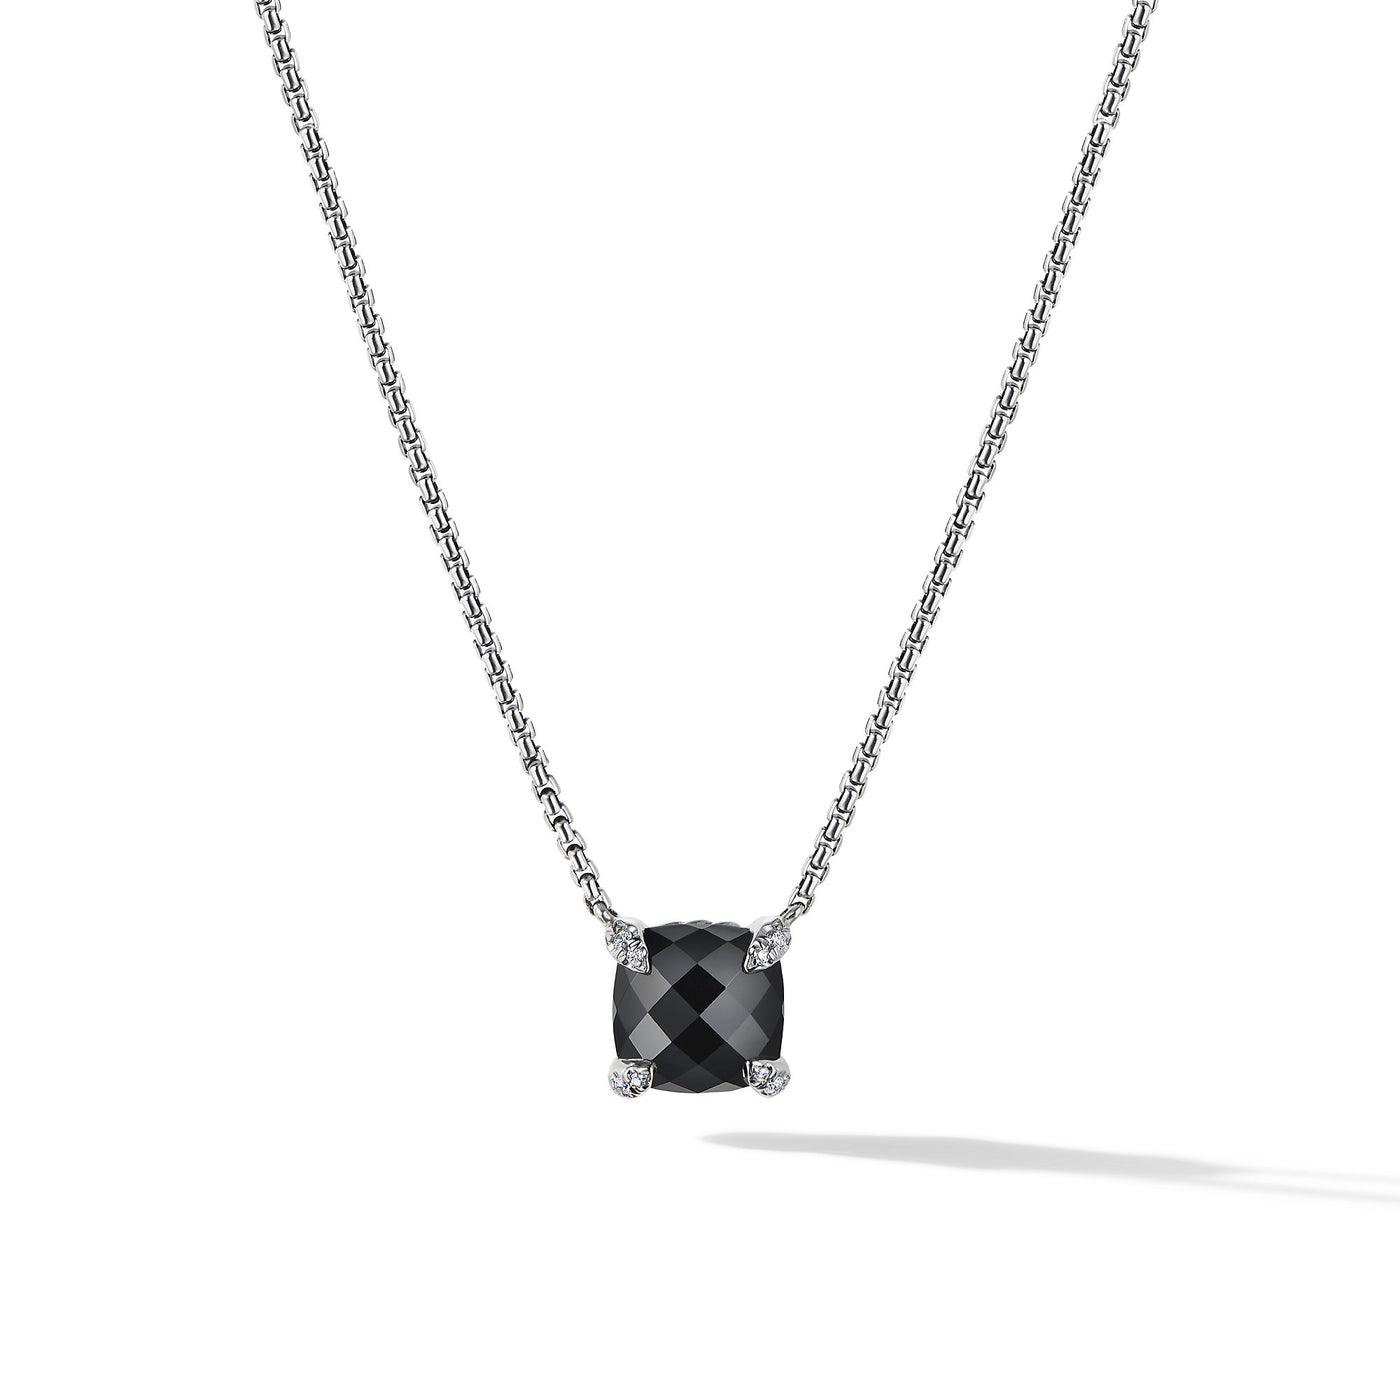 Petite Chatelaine® Pendant Necklace in Sterling Silver with Black Onyx and Diamonds\, 9mm